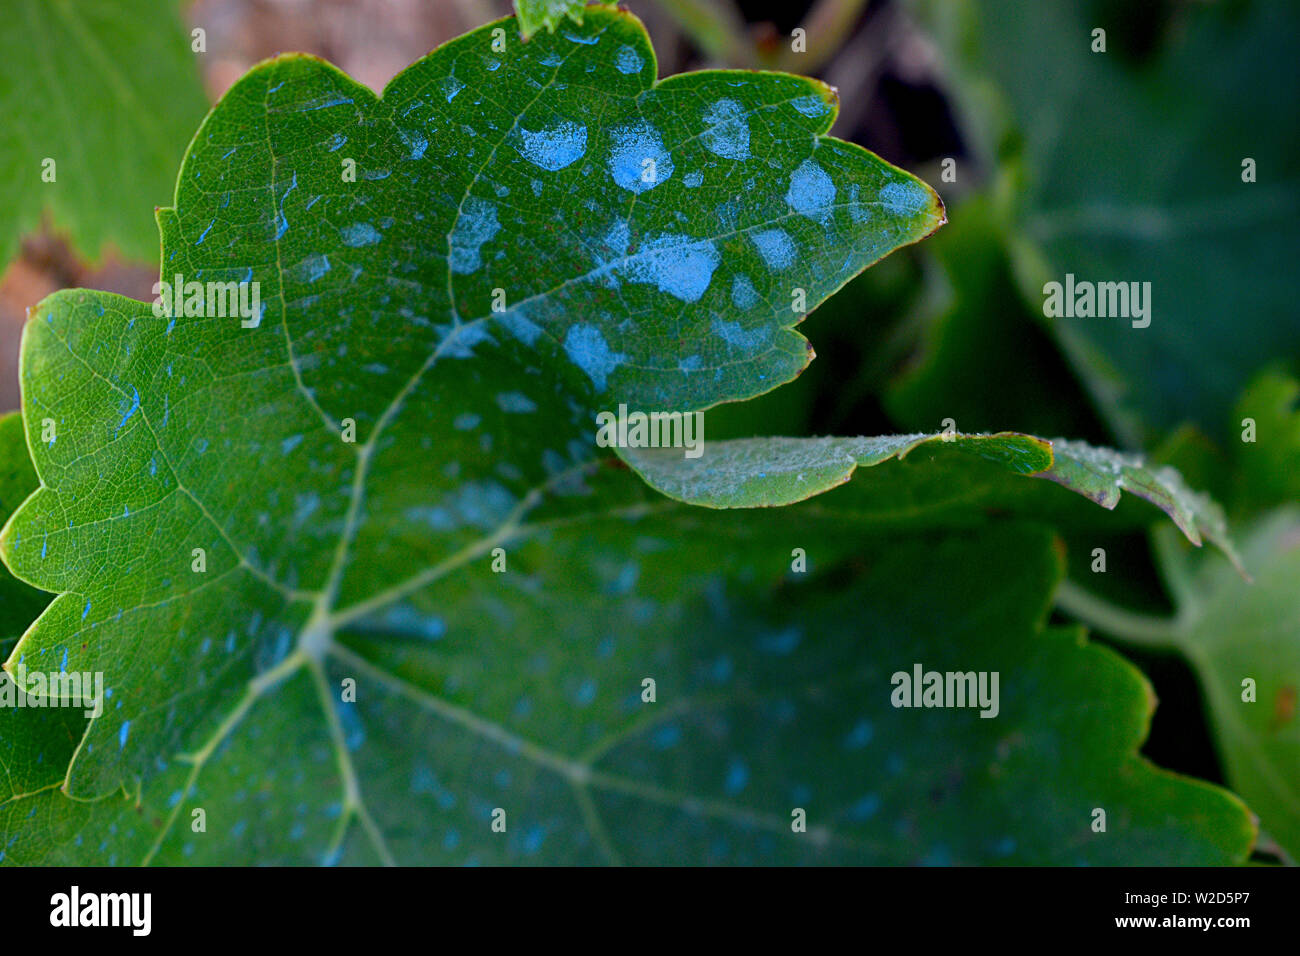 Chemical usage in agriculture. Pesticide residues on a green leaf. Close-up shot. Stock Photo